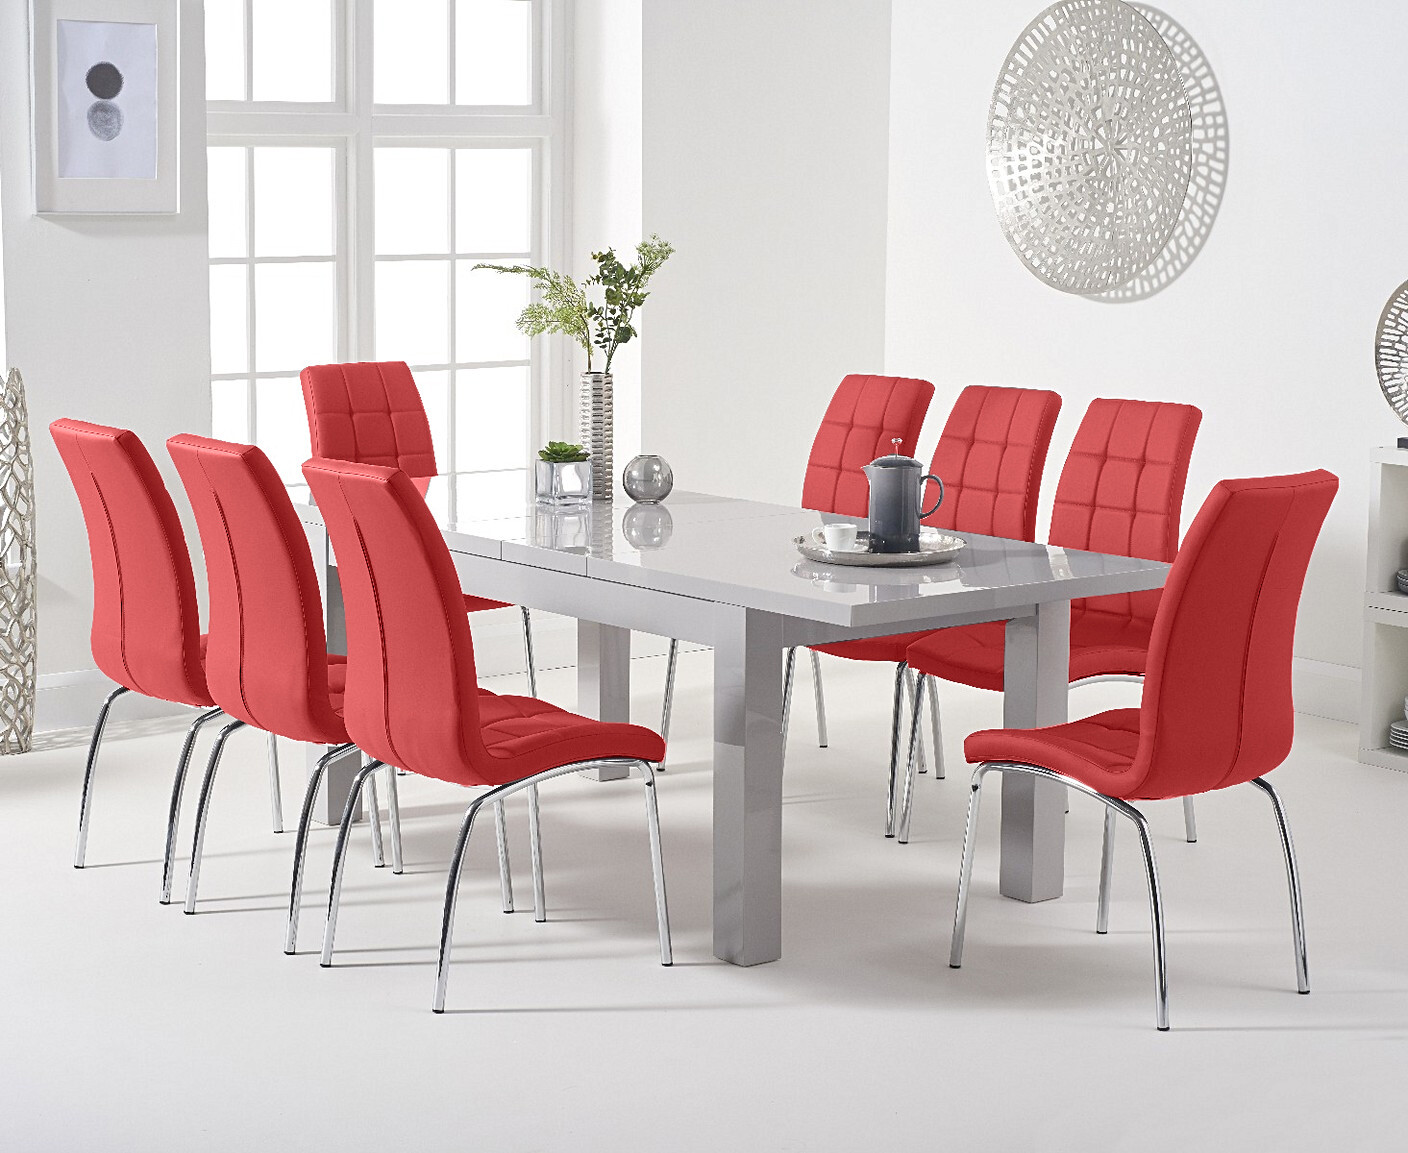 Extending Seattle 160cm Light Grey High Gloss Dining Table With 4 Cream Enzo Chairs